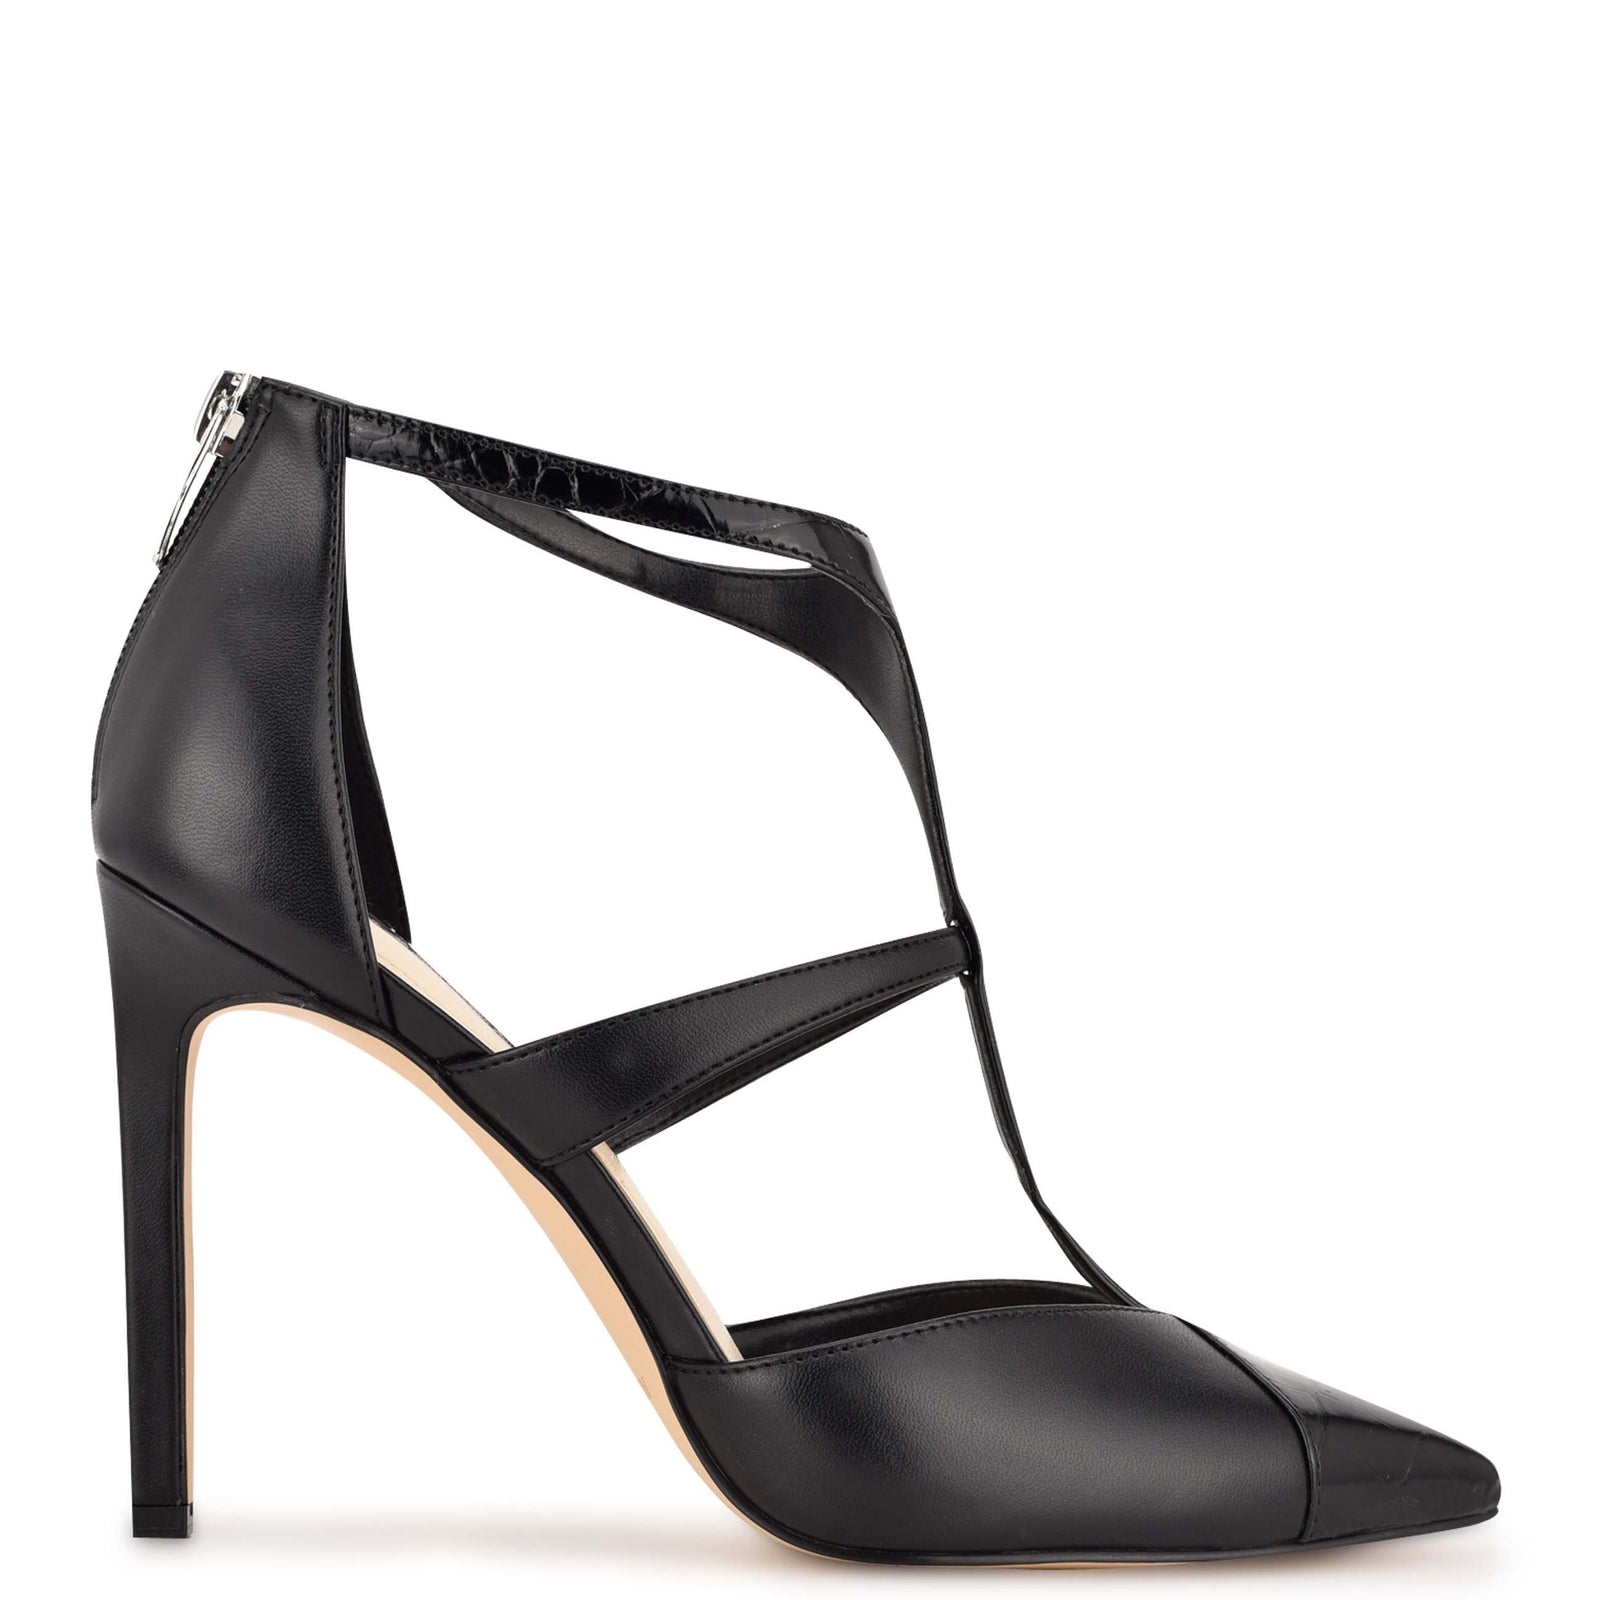 Heels | Nine West comfortable and fashionable shoes and handbags for ...